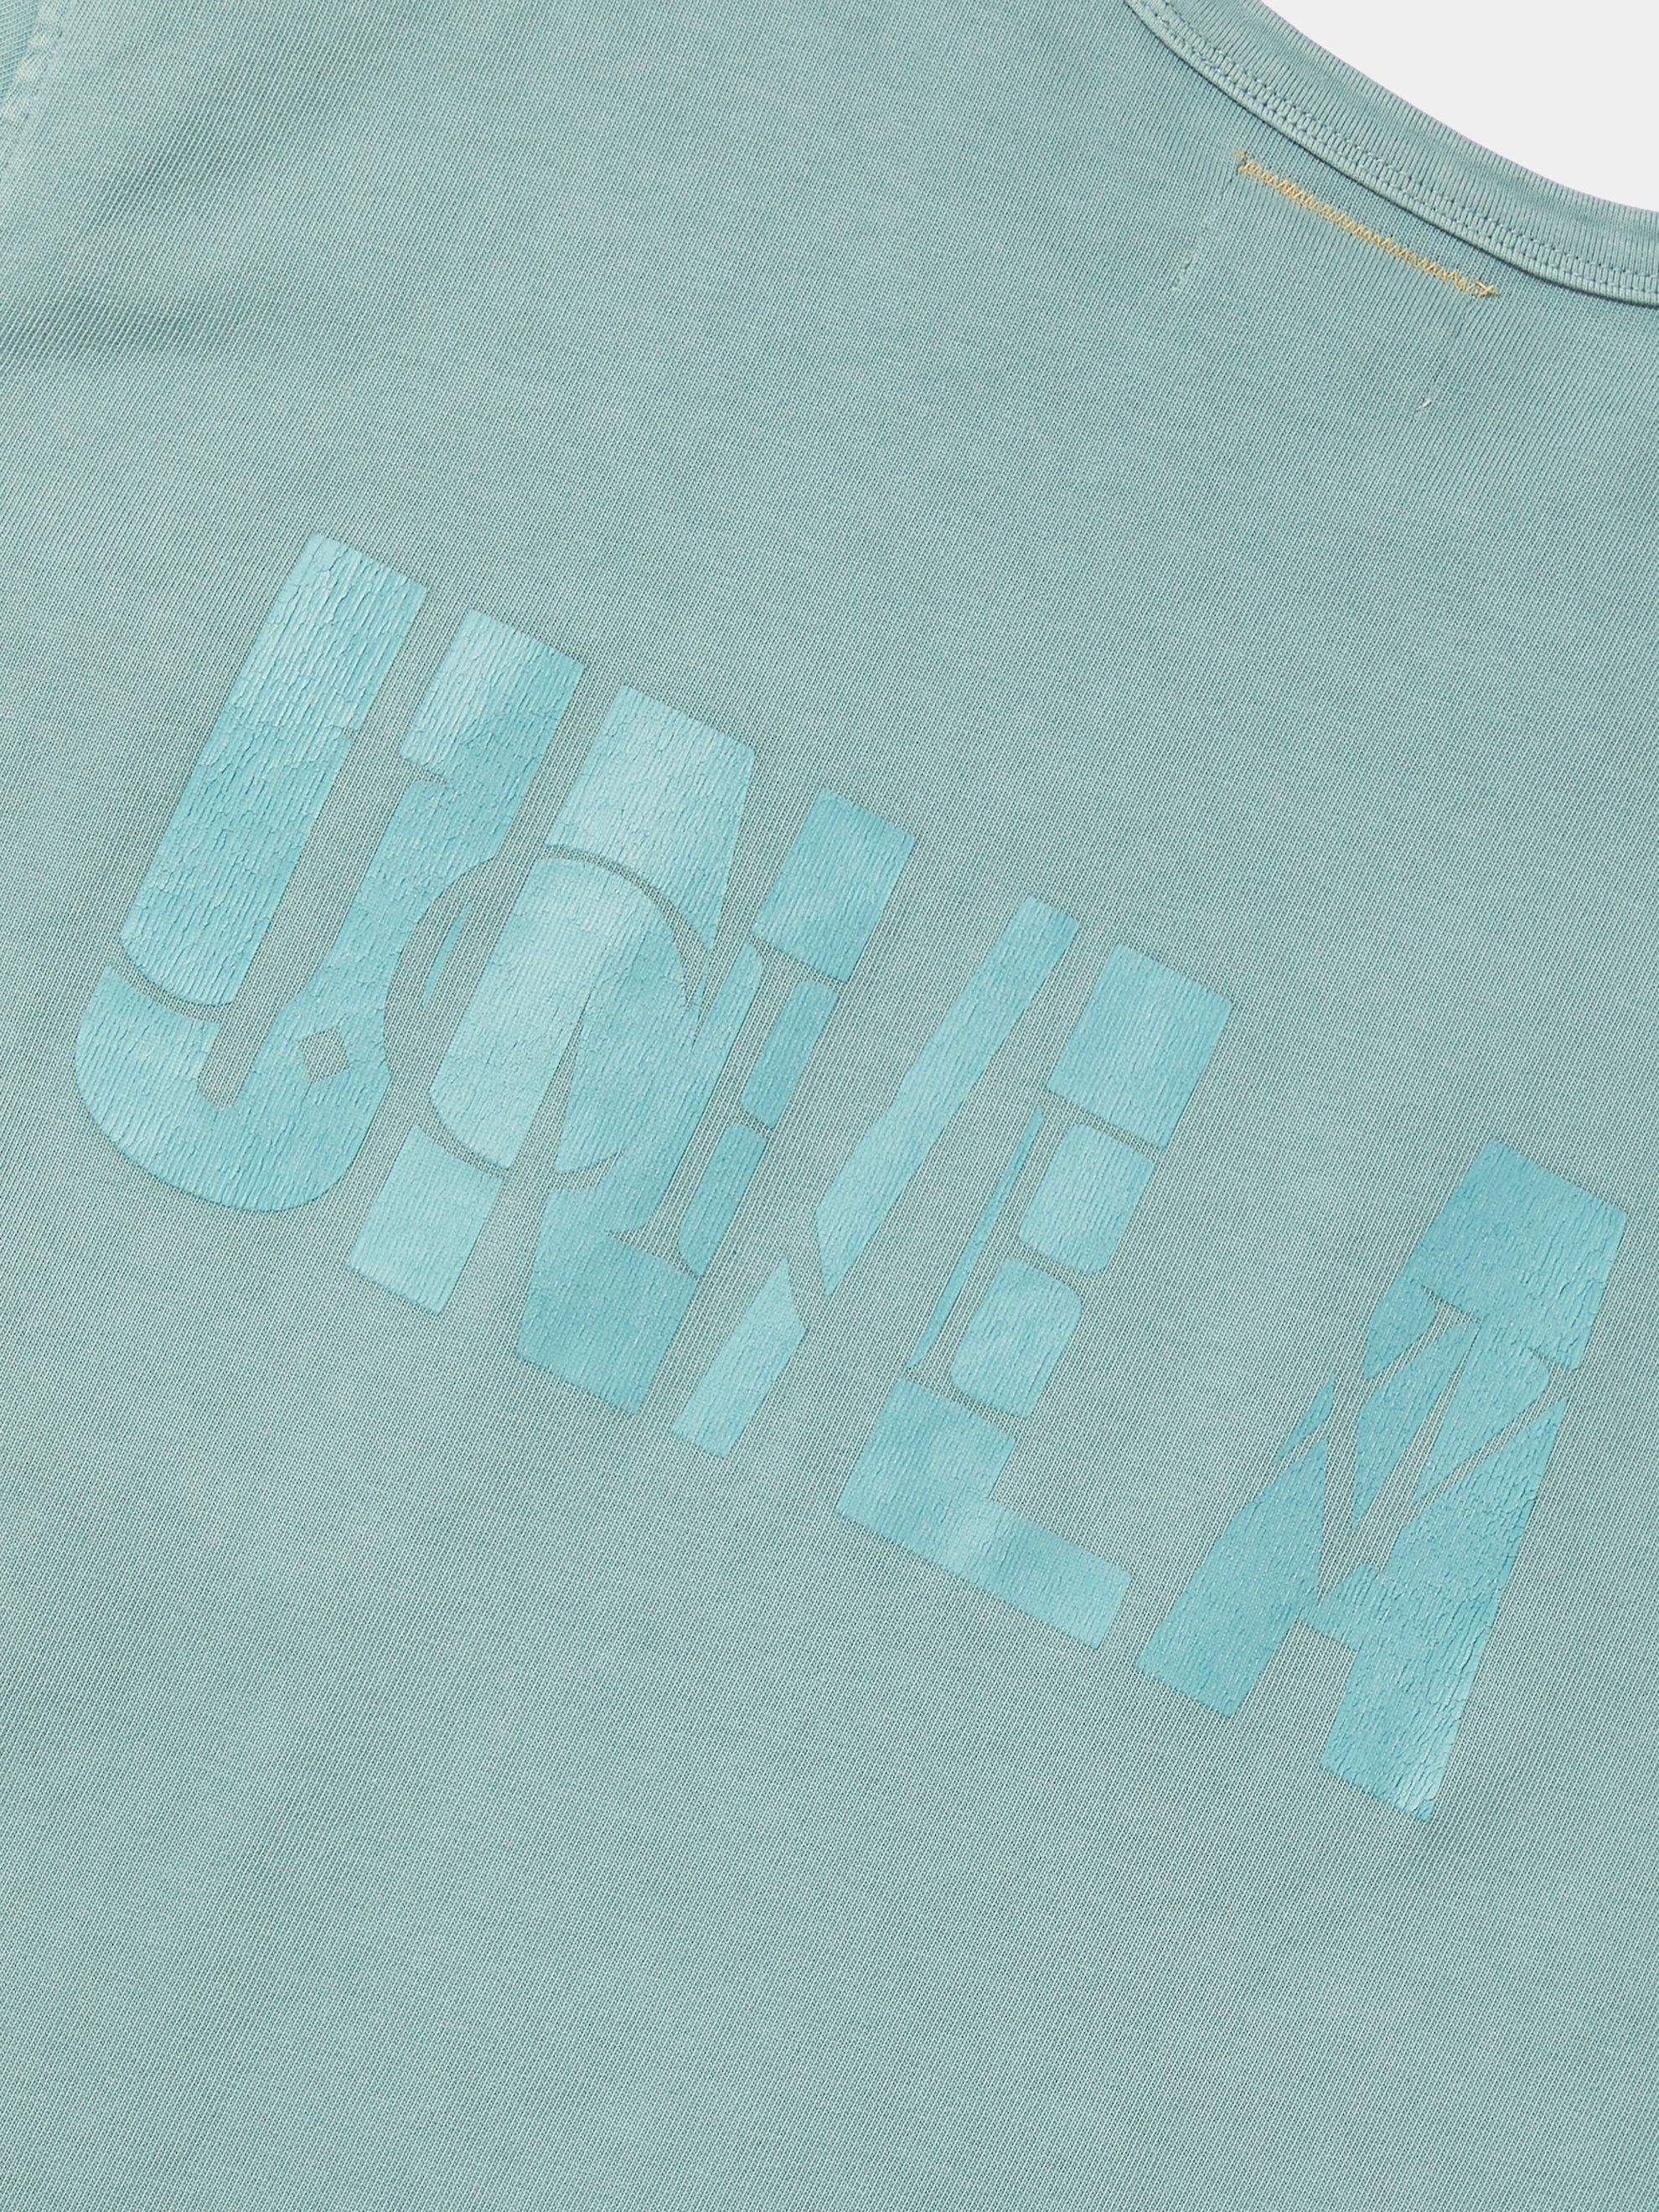 Union x J.Crew Rugby Jersey Tee (Faded Blue/Storm)